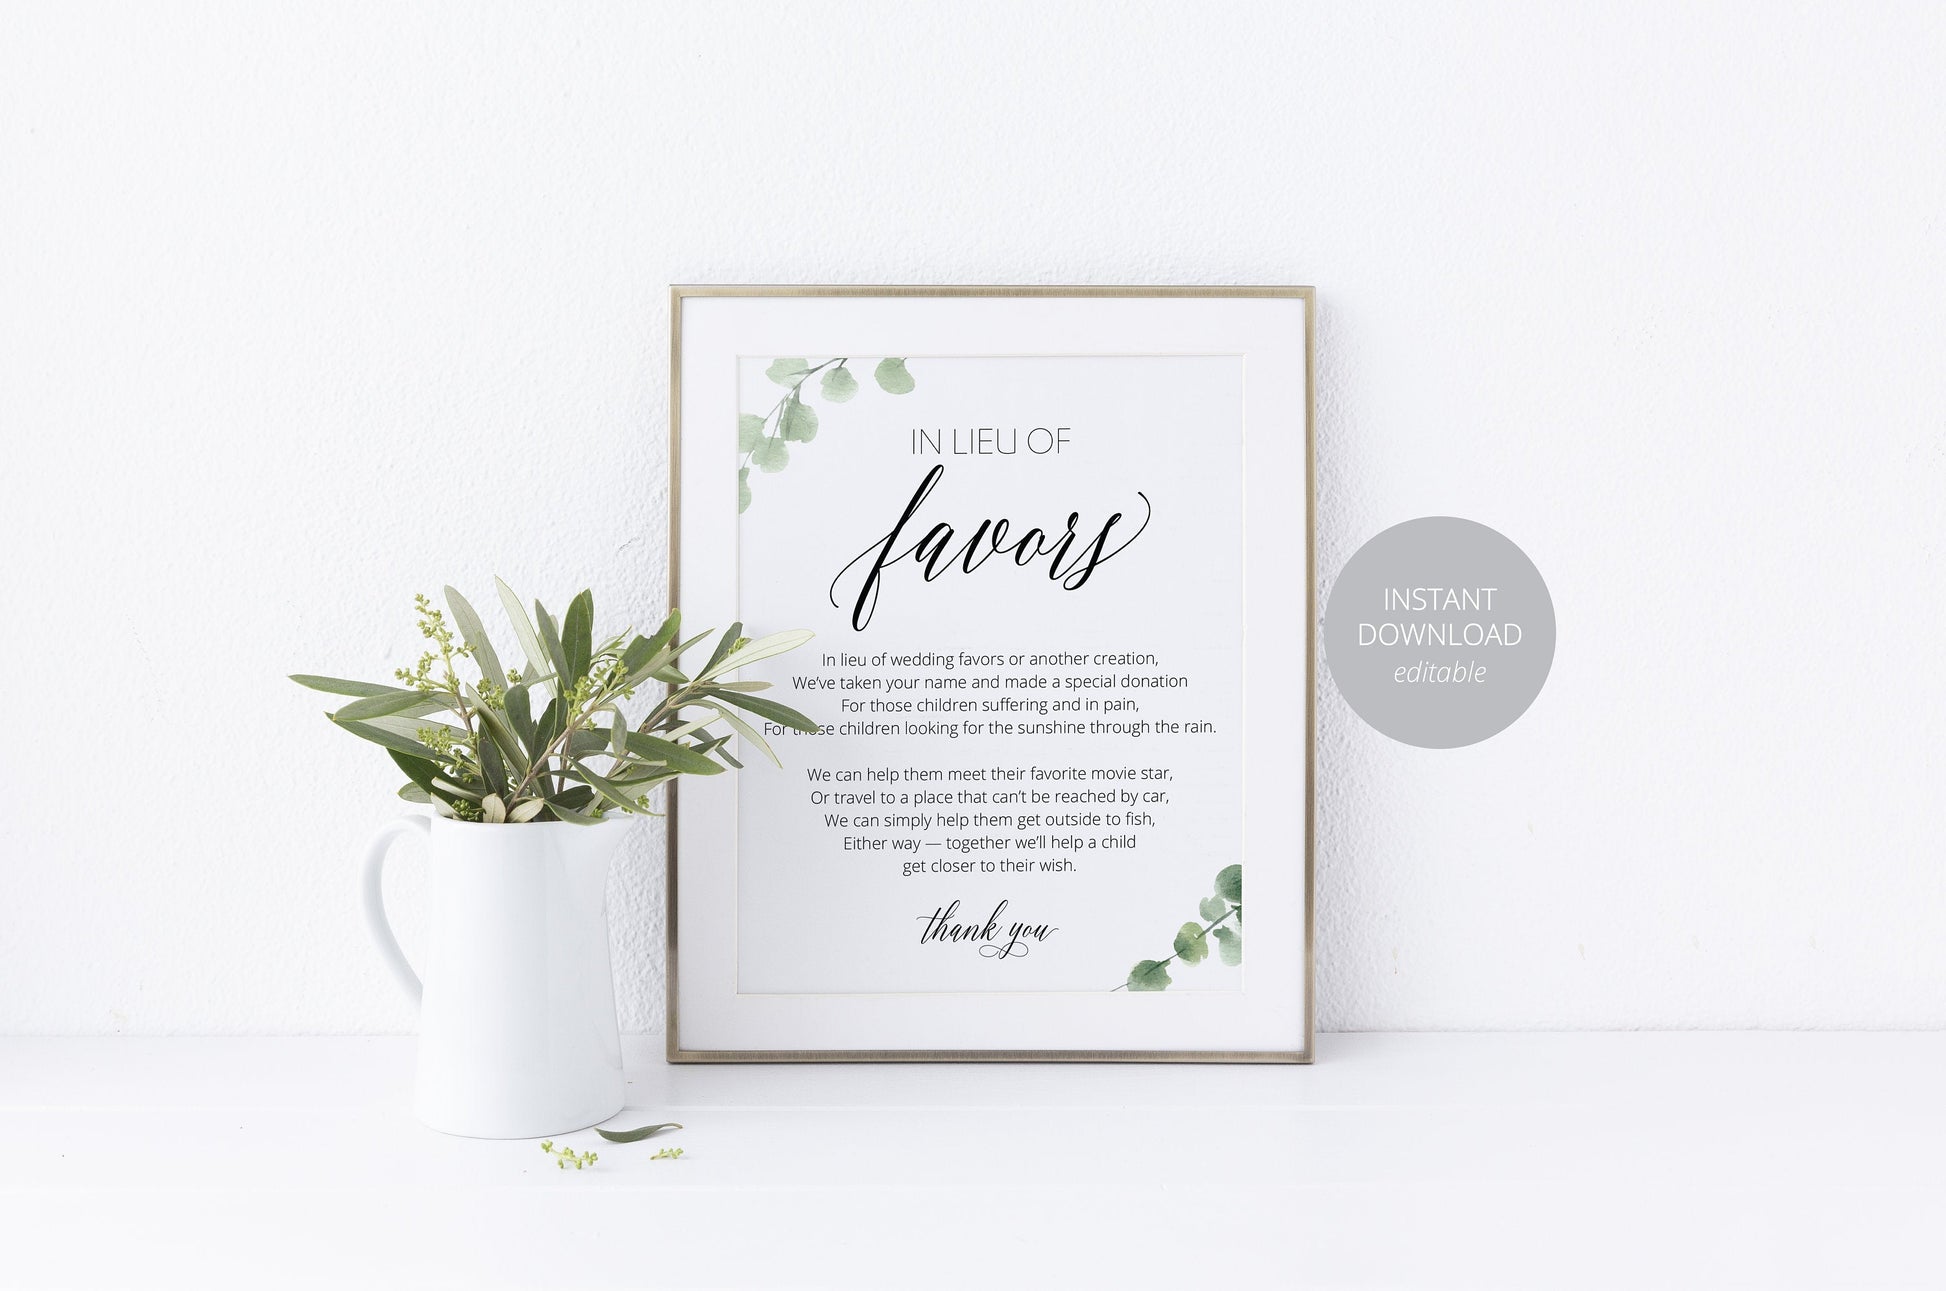 Printable Wedding, In lieu of favors sign,Wedding Favors template,Wedding Sign, Wedding Printable, Instant Download SIGNS | PHOTO BOOTH SAVVY PAPER CO